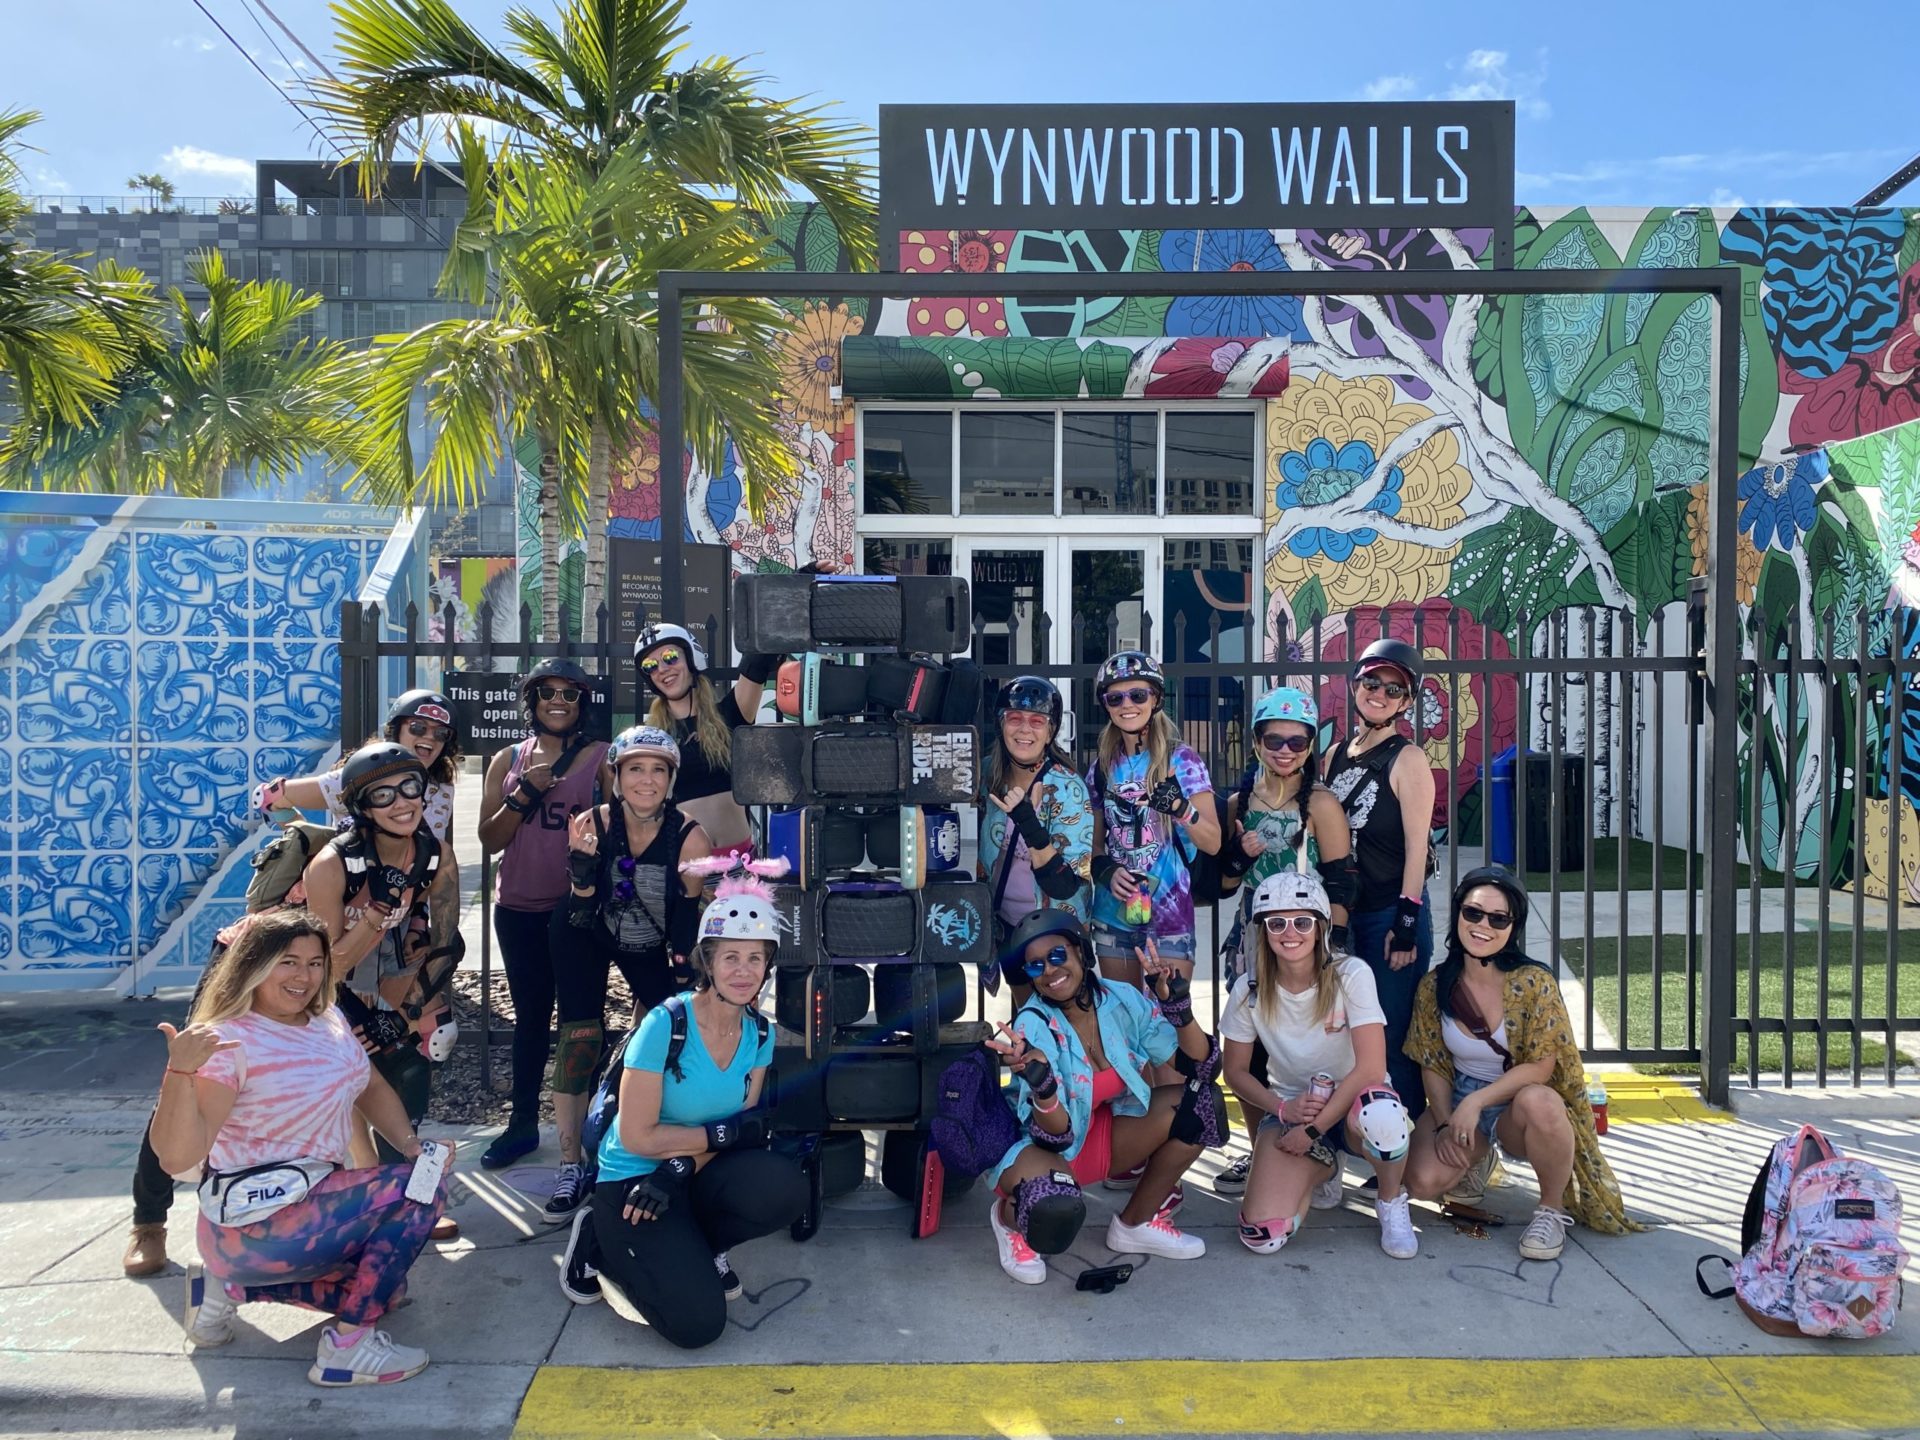 Drift Sisters pose at the entrance to Wynwood Walls for the Float Gang photo scavenger hunt.